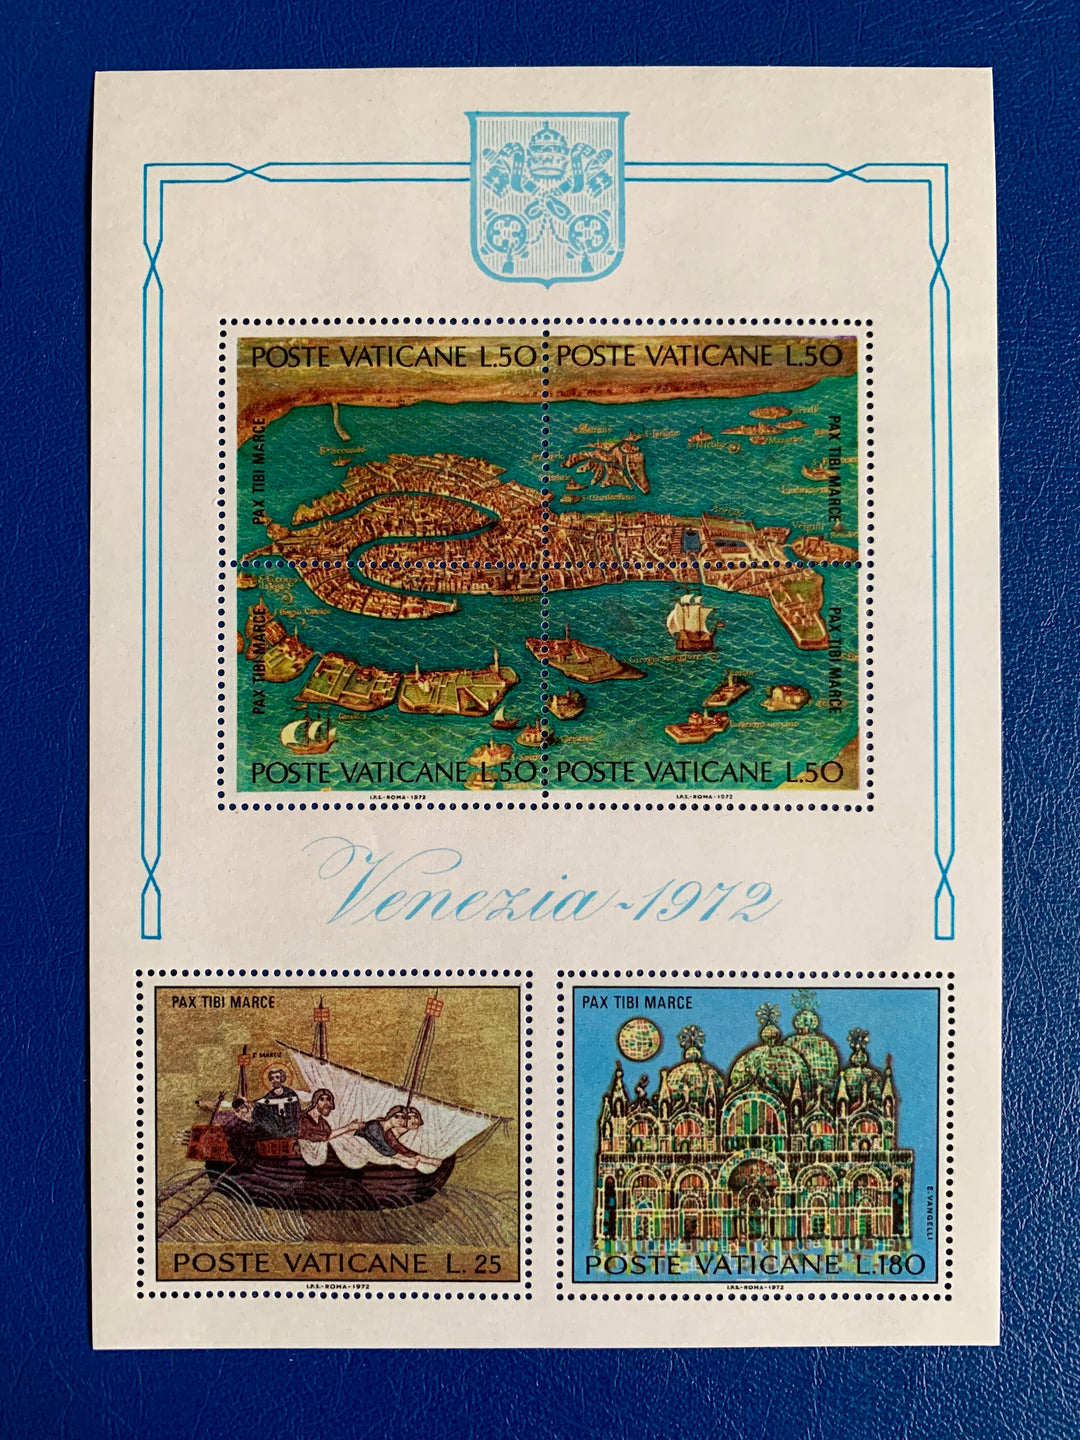 Vatican - Original Vintage Postage Stamps- 1972 - Venice Souvenir Sheet - for the collector, artist or crafter